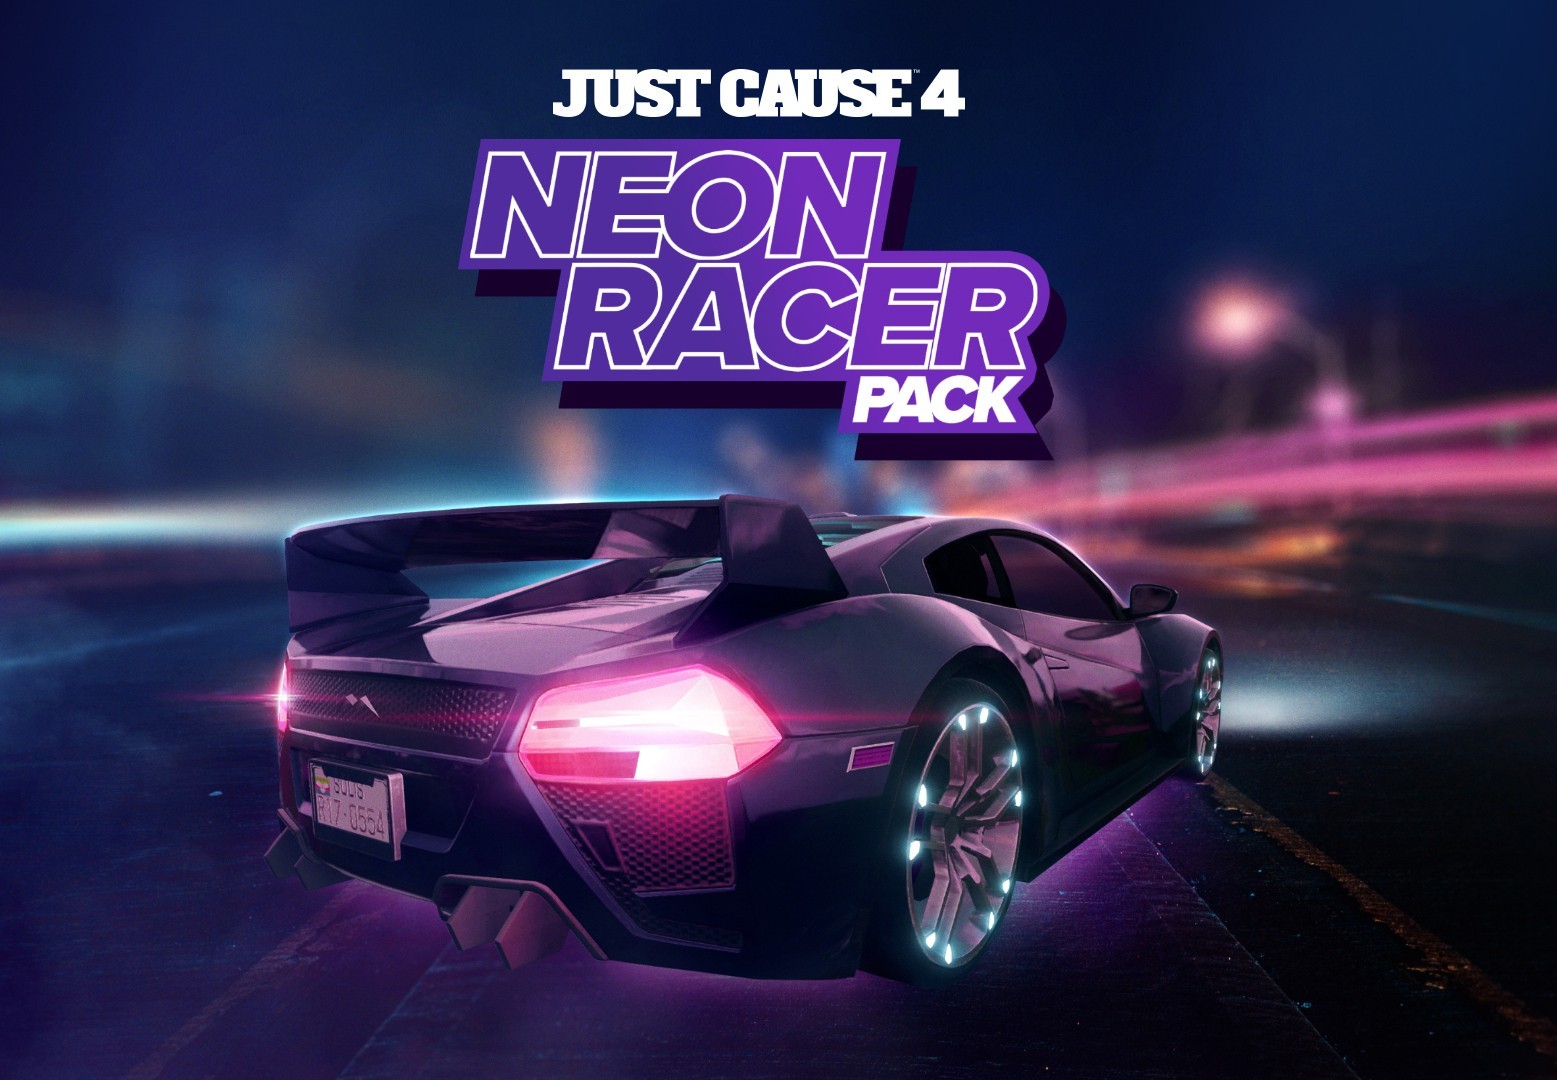 Just Cause 4 - Neon Racer Pack DLC US PS4 CD Key